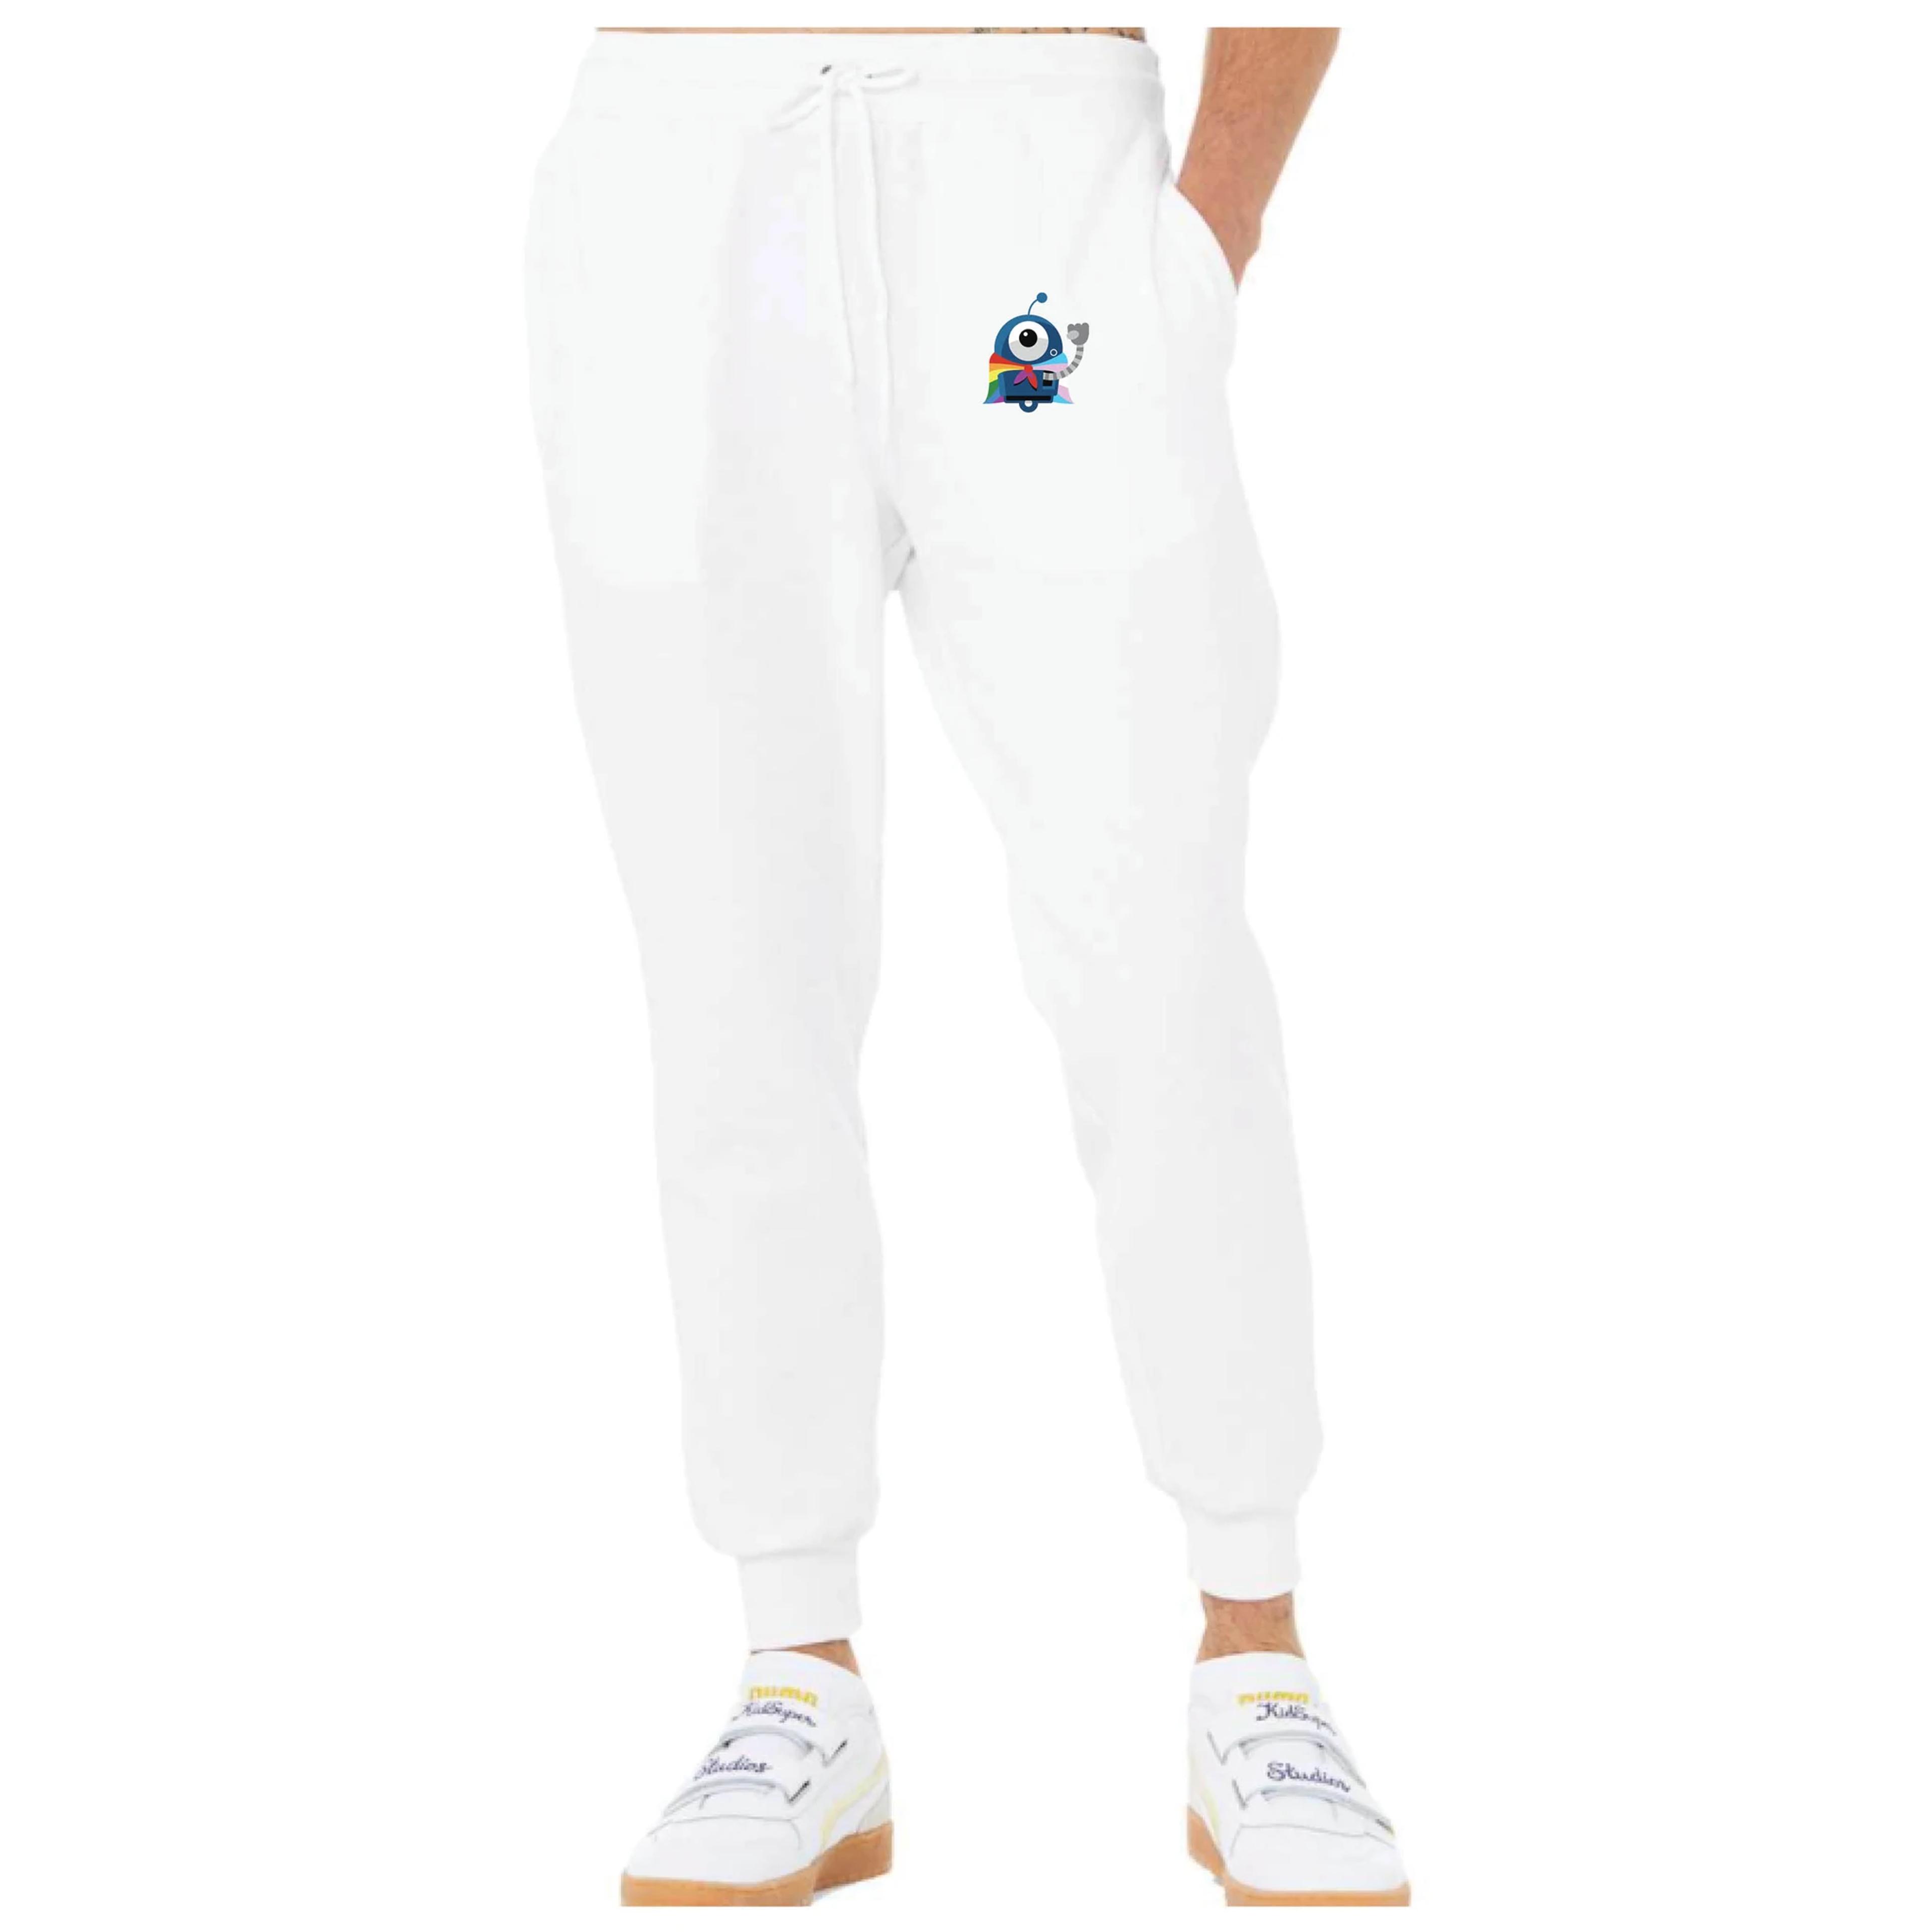 White joggers with pride bot graphic on the left leg